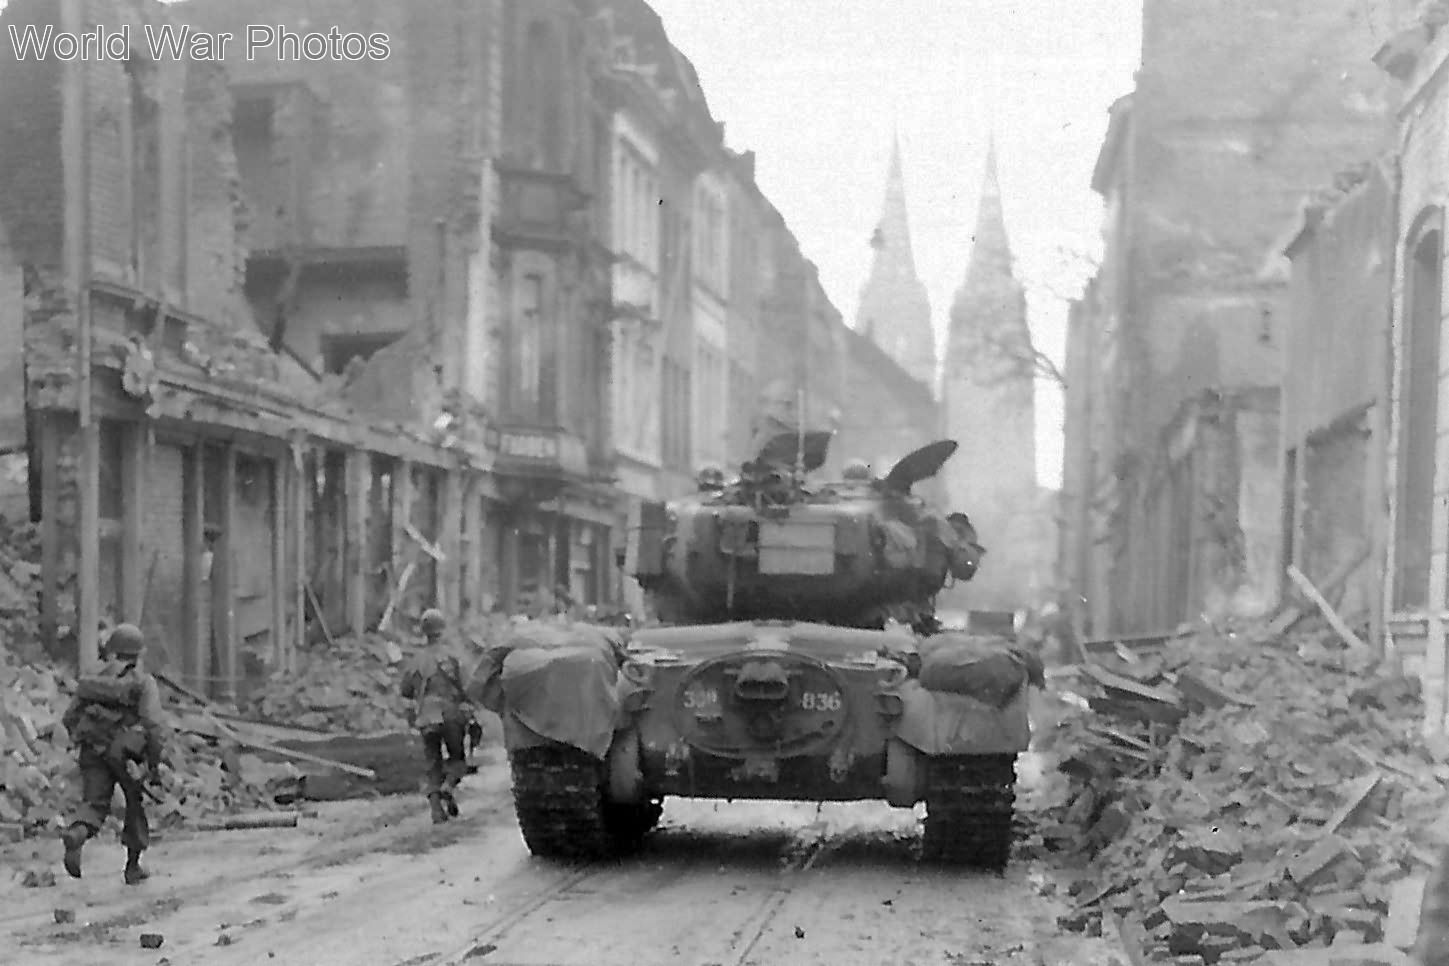 M26_Pershing_3AD_in_action_Cologne_6mar1945.jpg